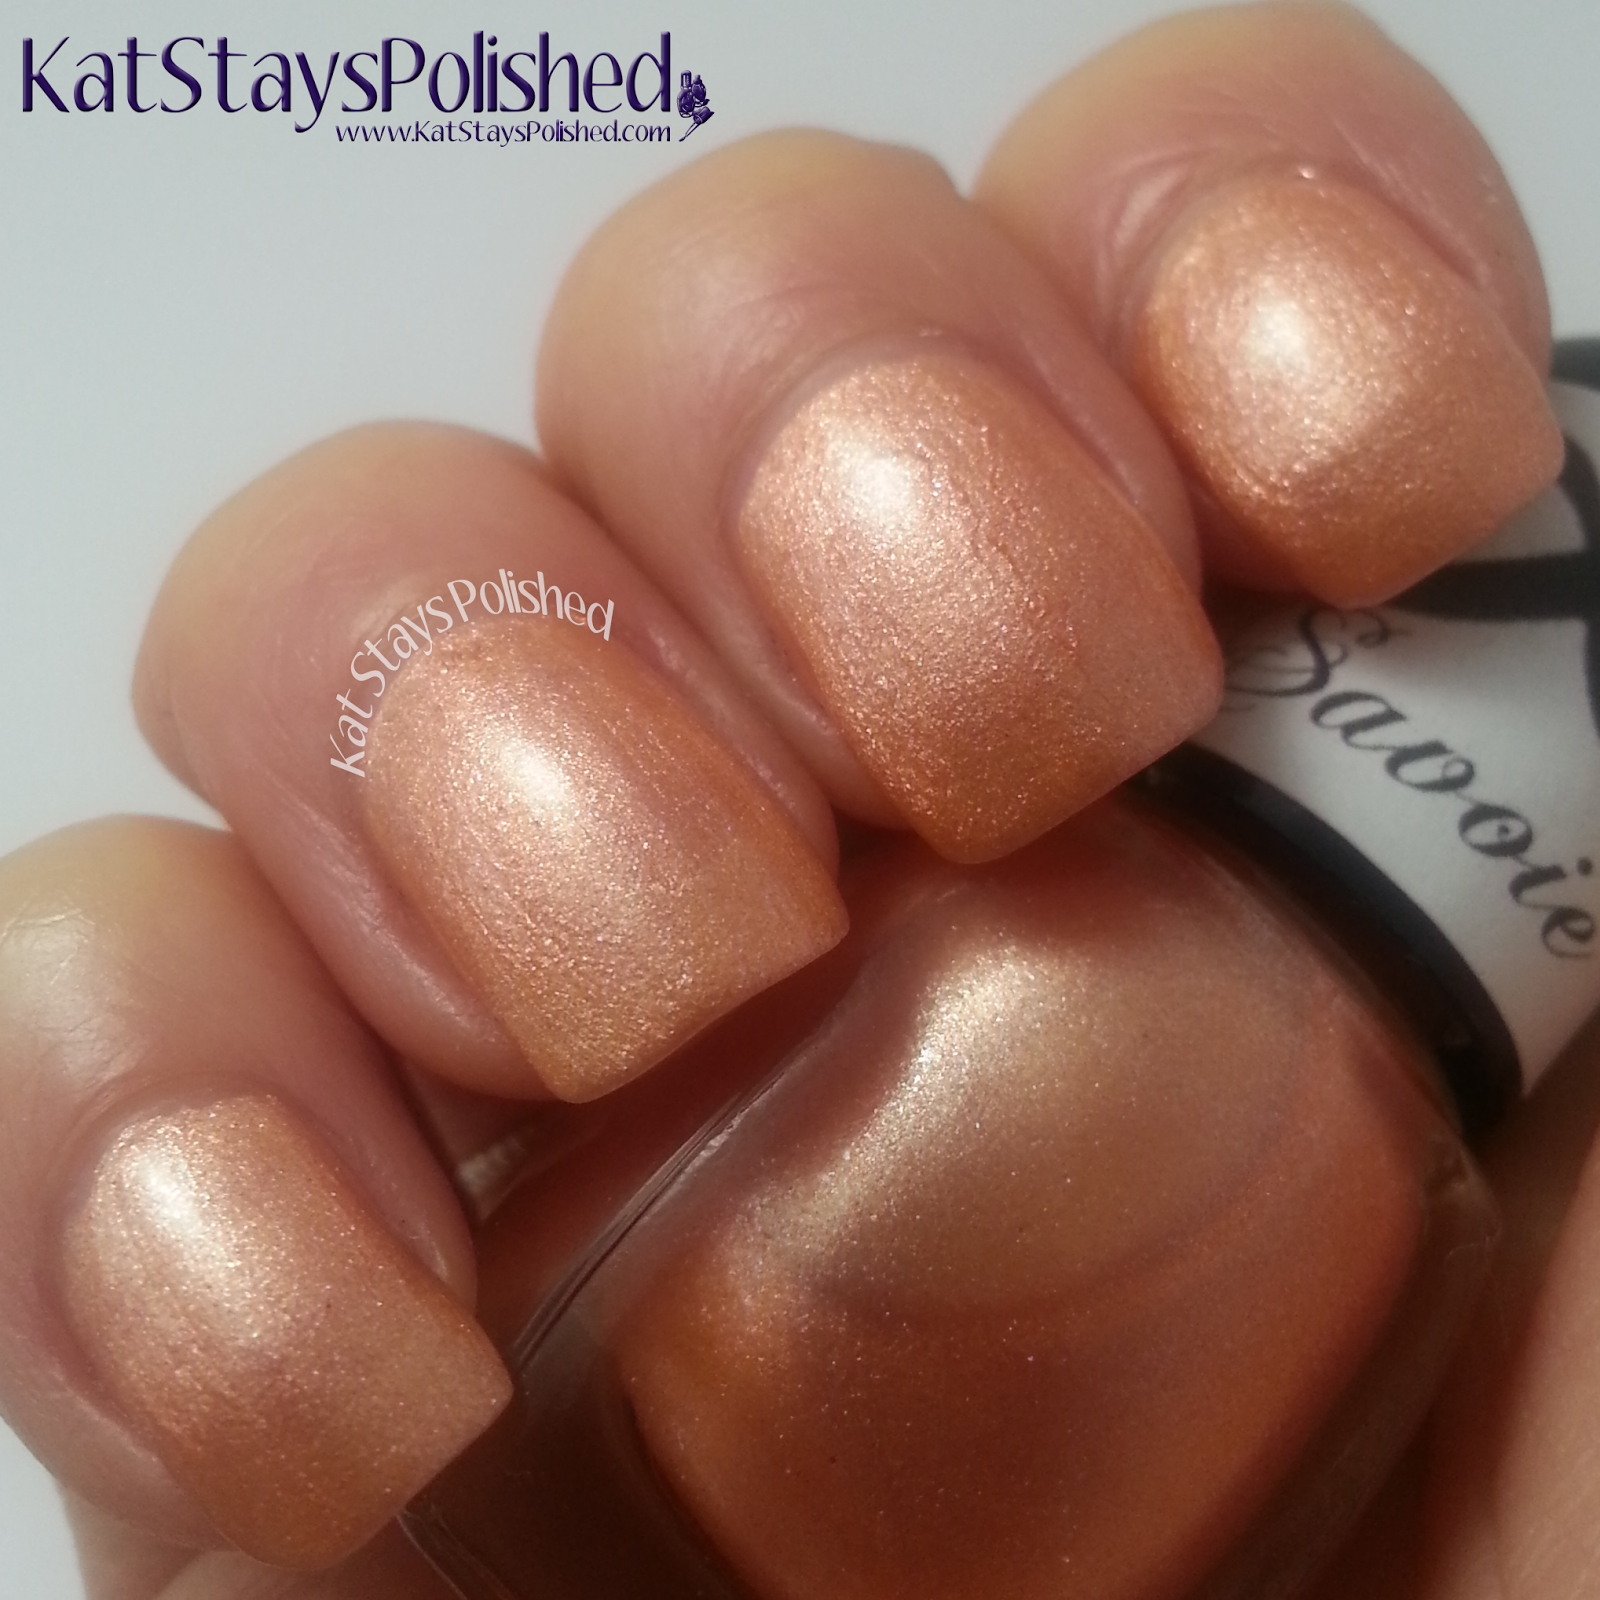 Savoie - Aren't You a Peach | Kat Stays Polished